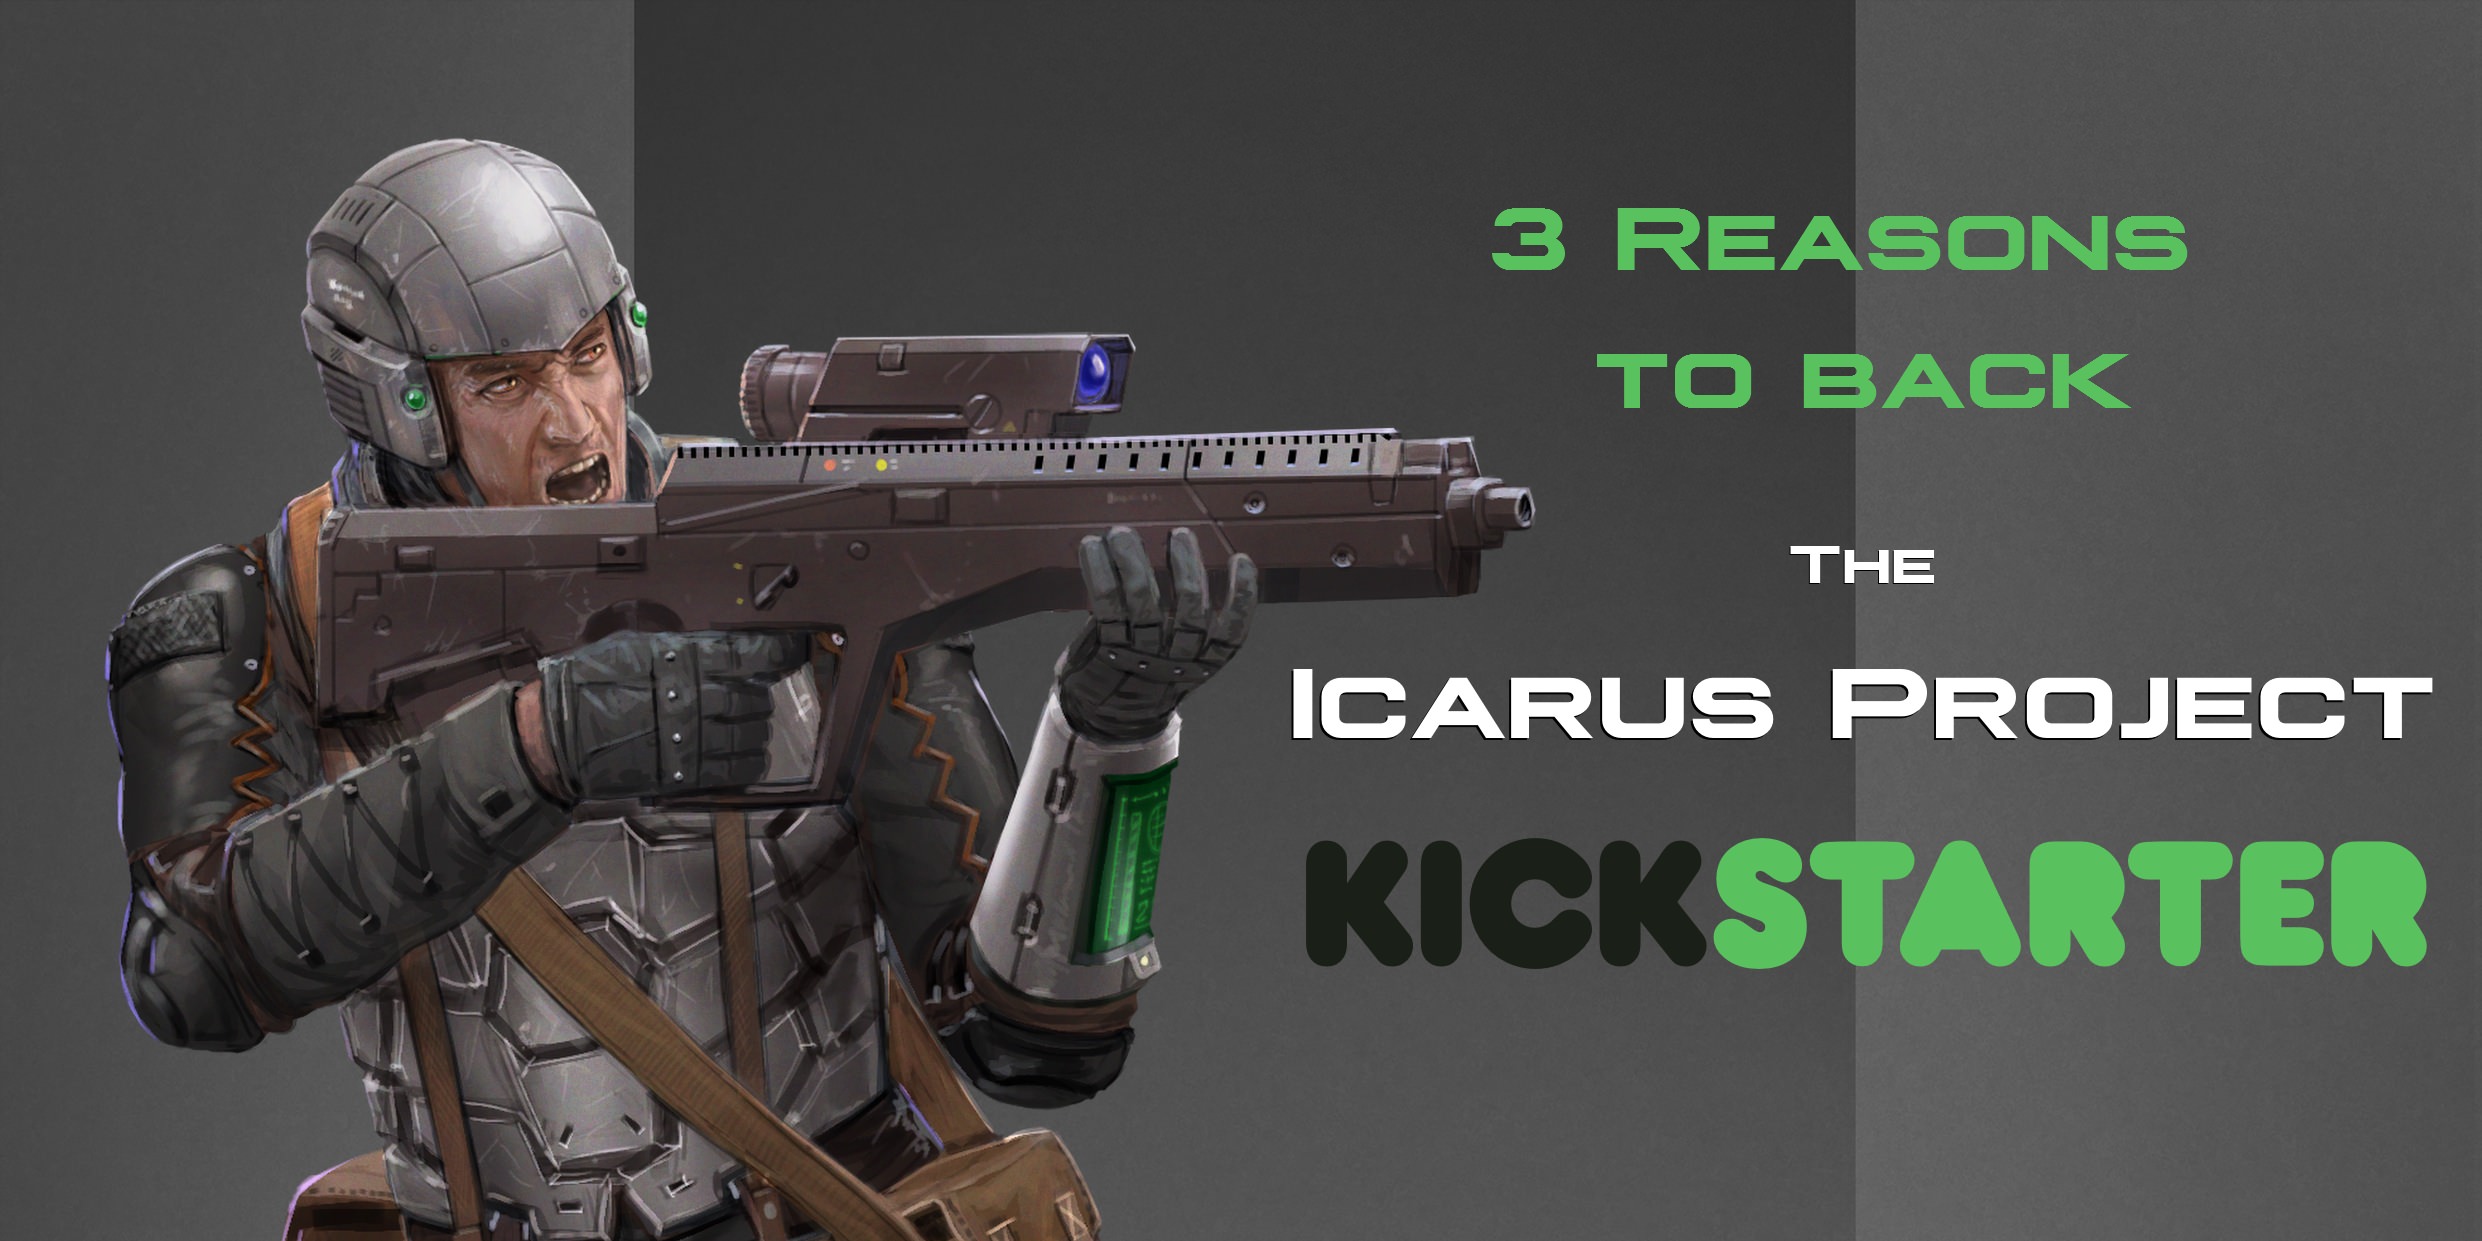 3 Reasons to Back the Icarus Project Kickstarter